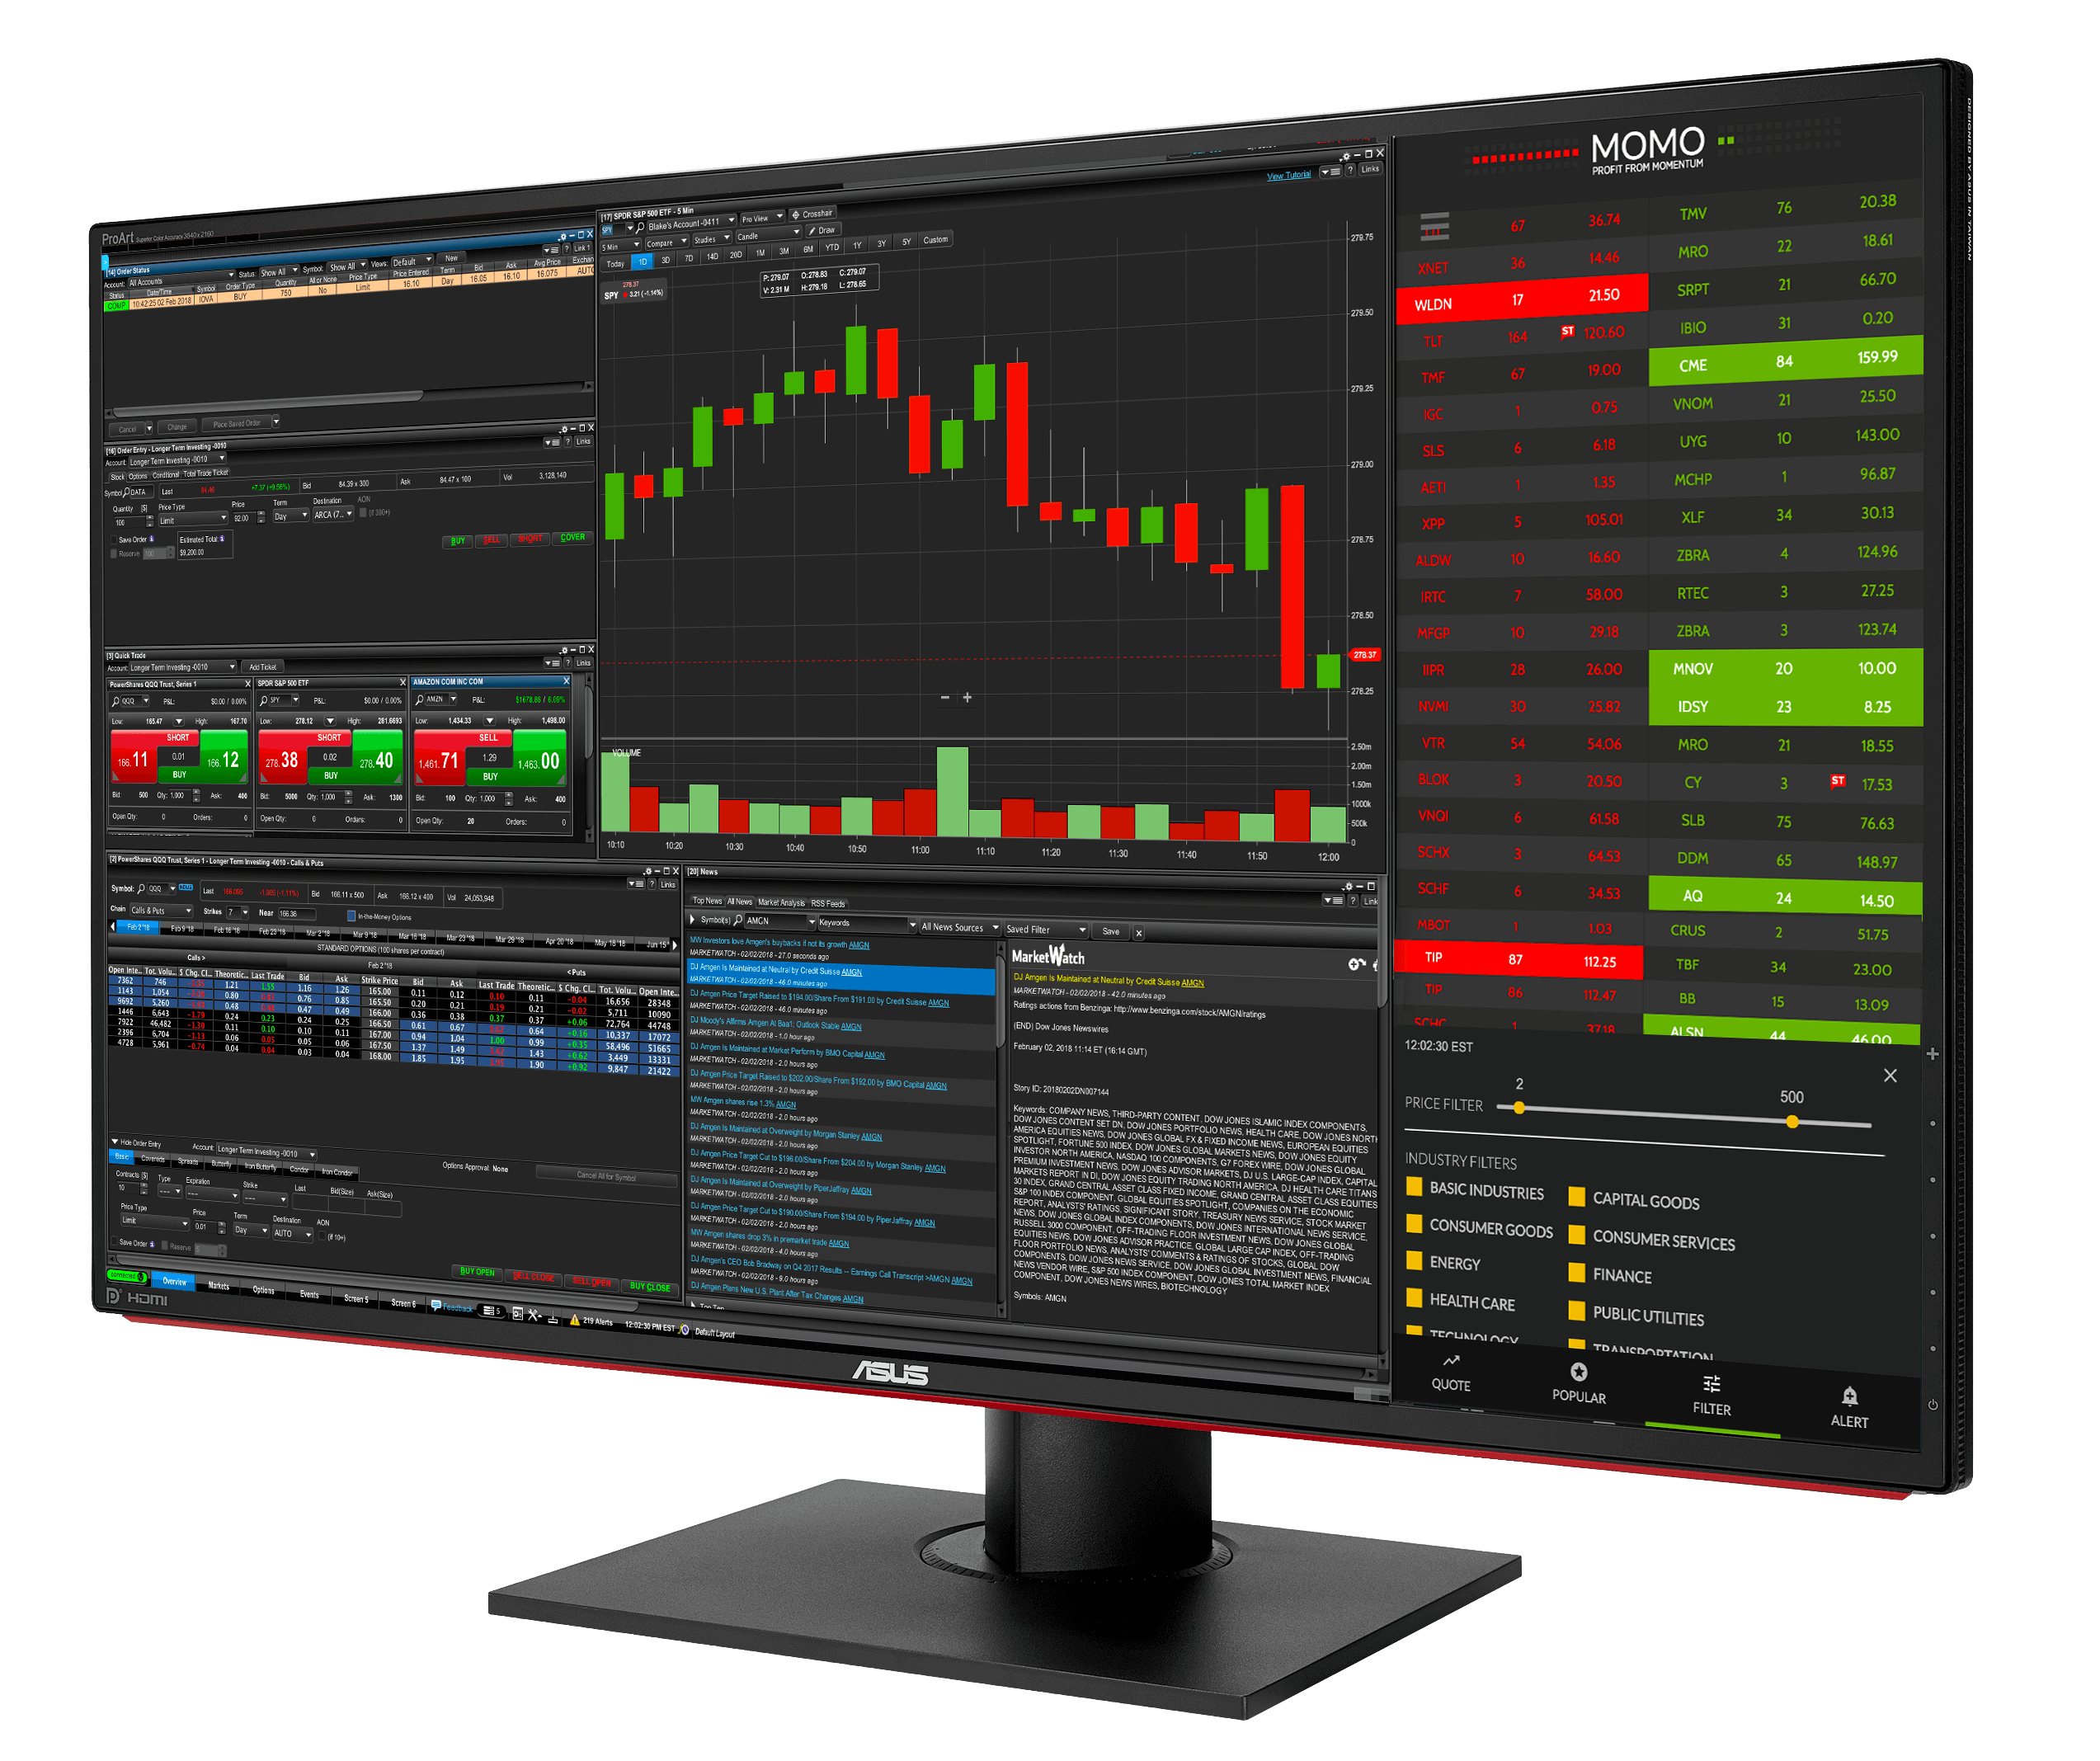 Realtime desktop stock application to find new US stock highs/lows, StockTwits, and tracking with alerts 